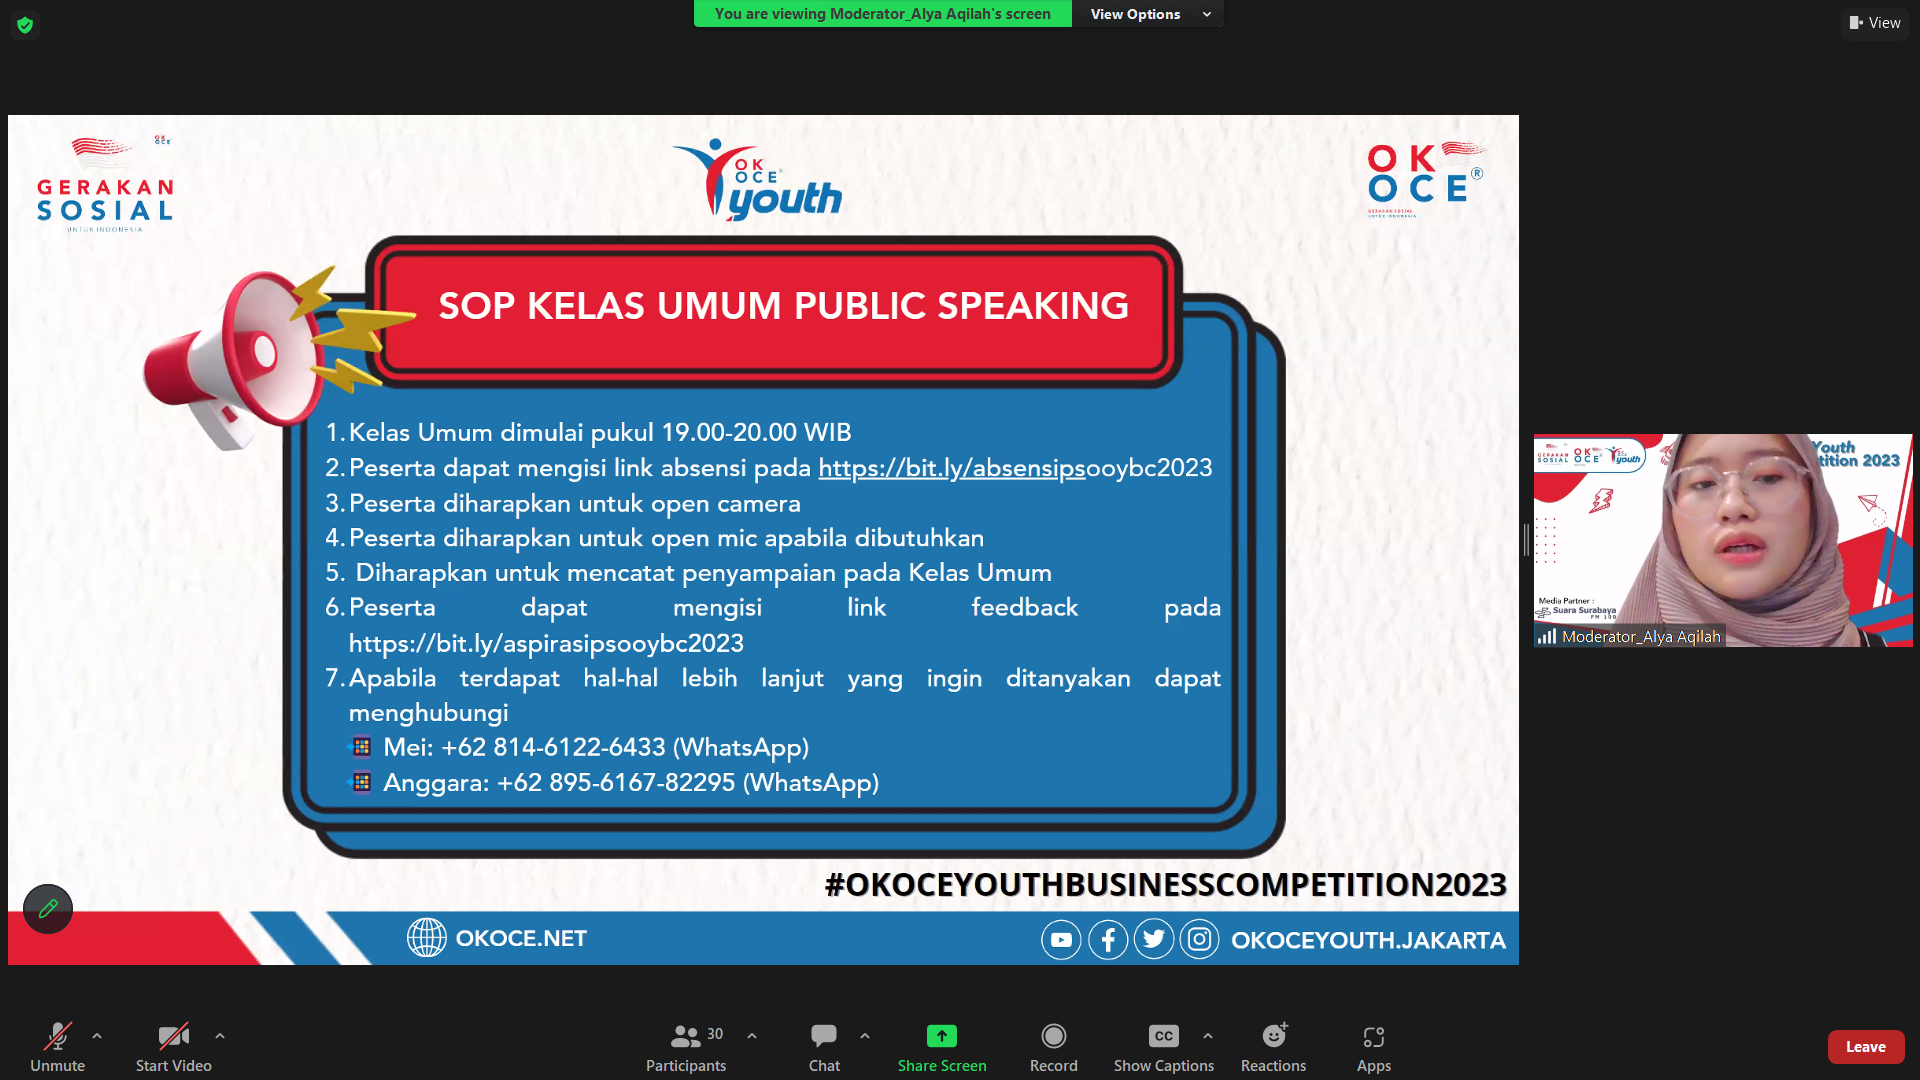 Foto OK OCE YOUTH BUSSINES COMPETITION